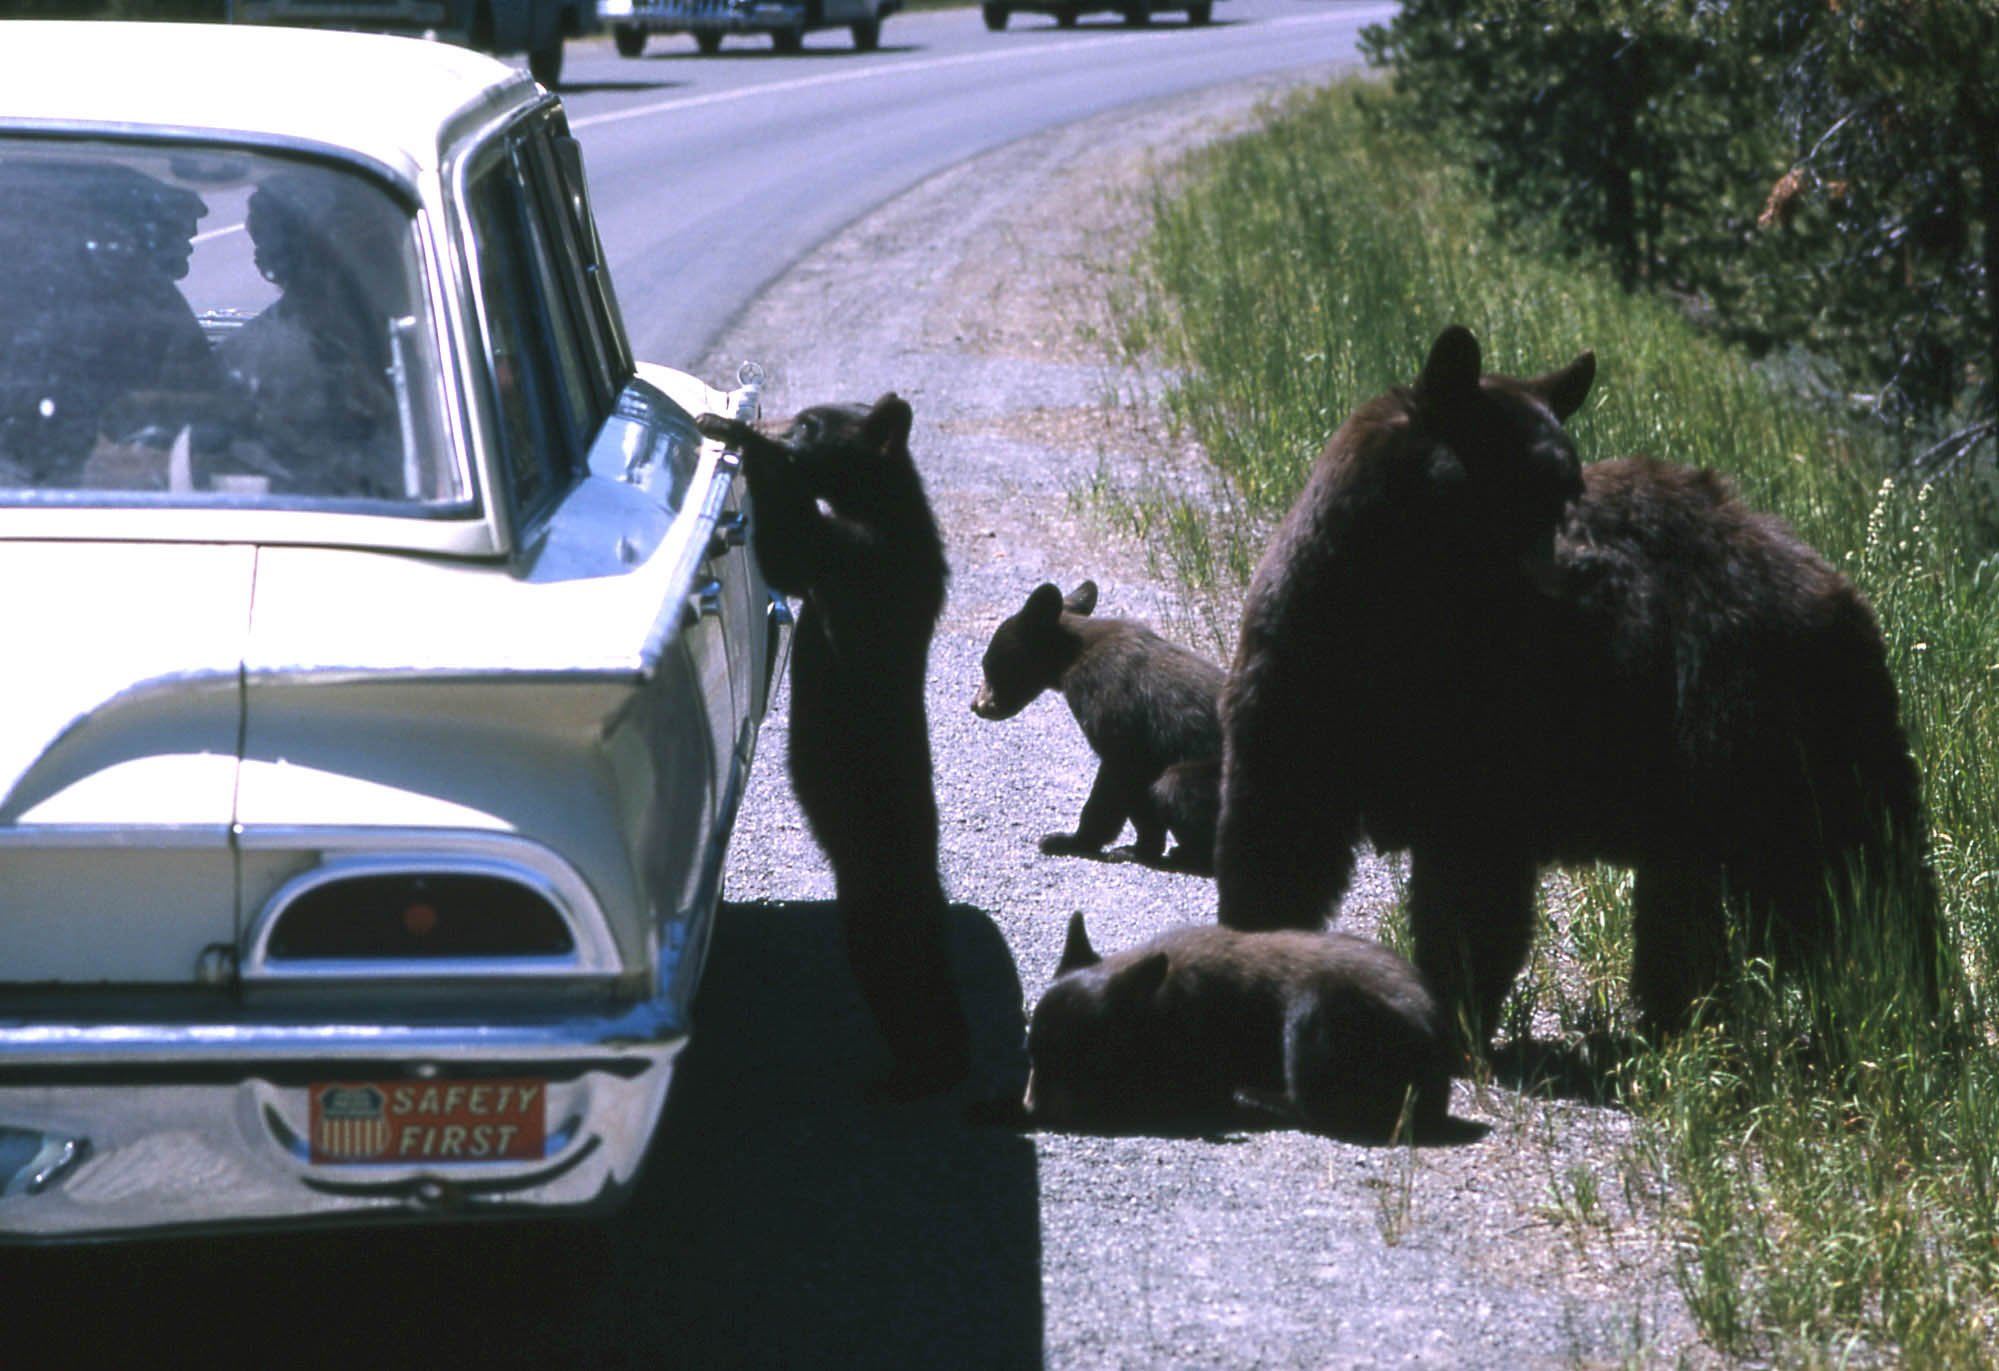 Sow black bear and three cubs by a  stopped car. One cub has front paws on on passenger door.